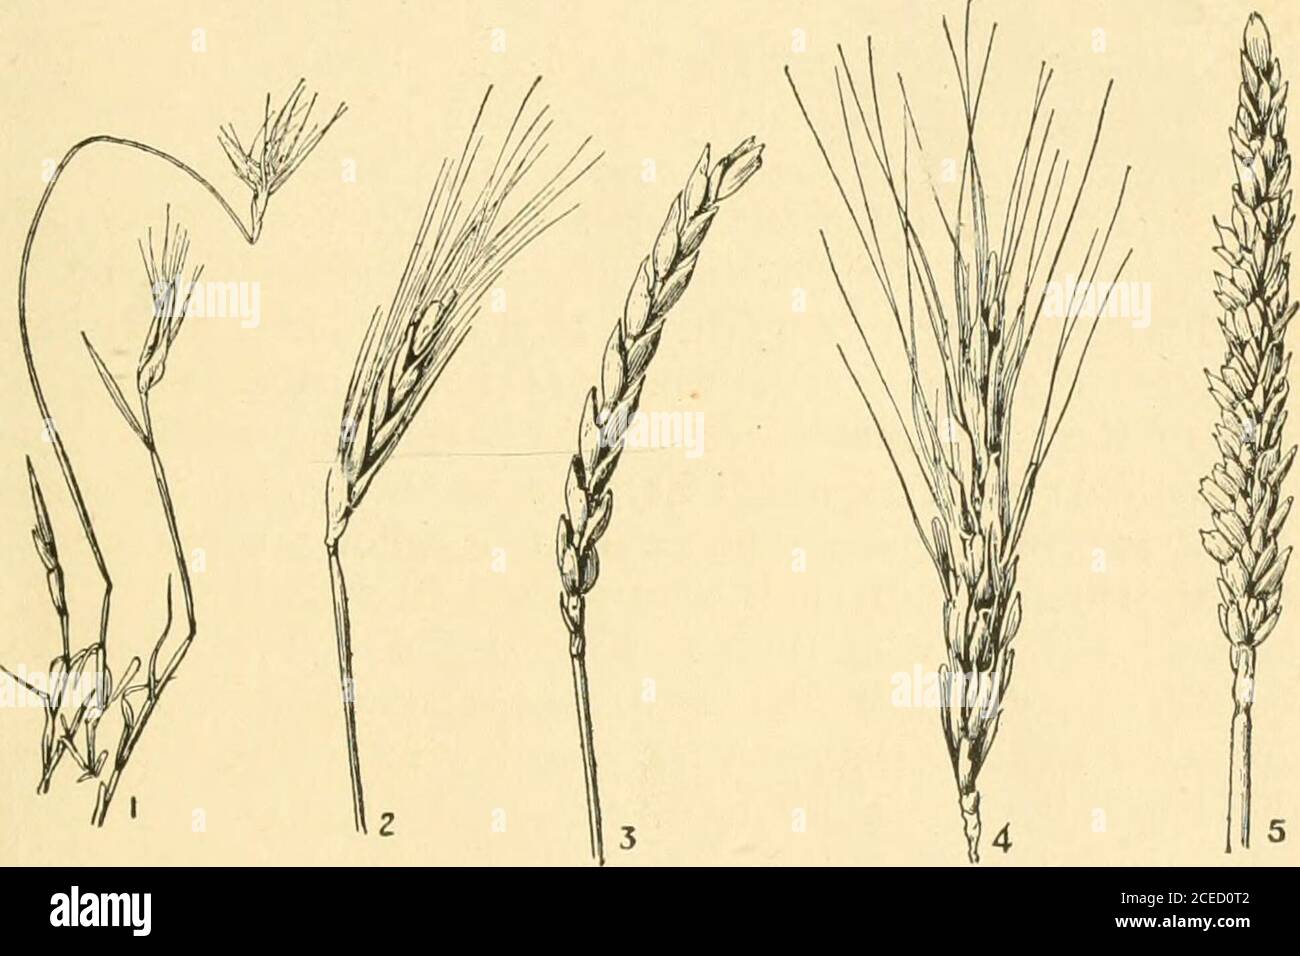 . The book of wheat : an economic history and practical manual of the wheat industry. d Buffalo Grass Hordese : Wheat-Barley-Rye-English Rye-GrassBambusea;: Bamboo Minn. Bui. 62, p. 392. THE WHEAT GRAIN AND PLANT 3 wheat. This is the hypothesis that accounts for most of thefacts involved. AH of the grass family, Gramineae, are easilydistinguished by having only one seed leaf, and for this rea-son they are known as monocotyledons. The wild animal grasses, Aegilops, found in such abundancein southern Europe, and resembling true wheat in every pointexcept in size of grain, are considered as the n Stock Photo